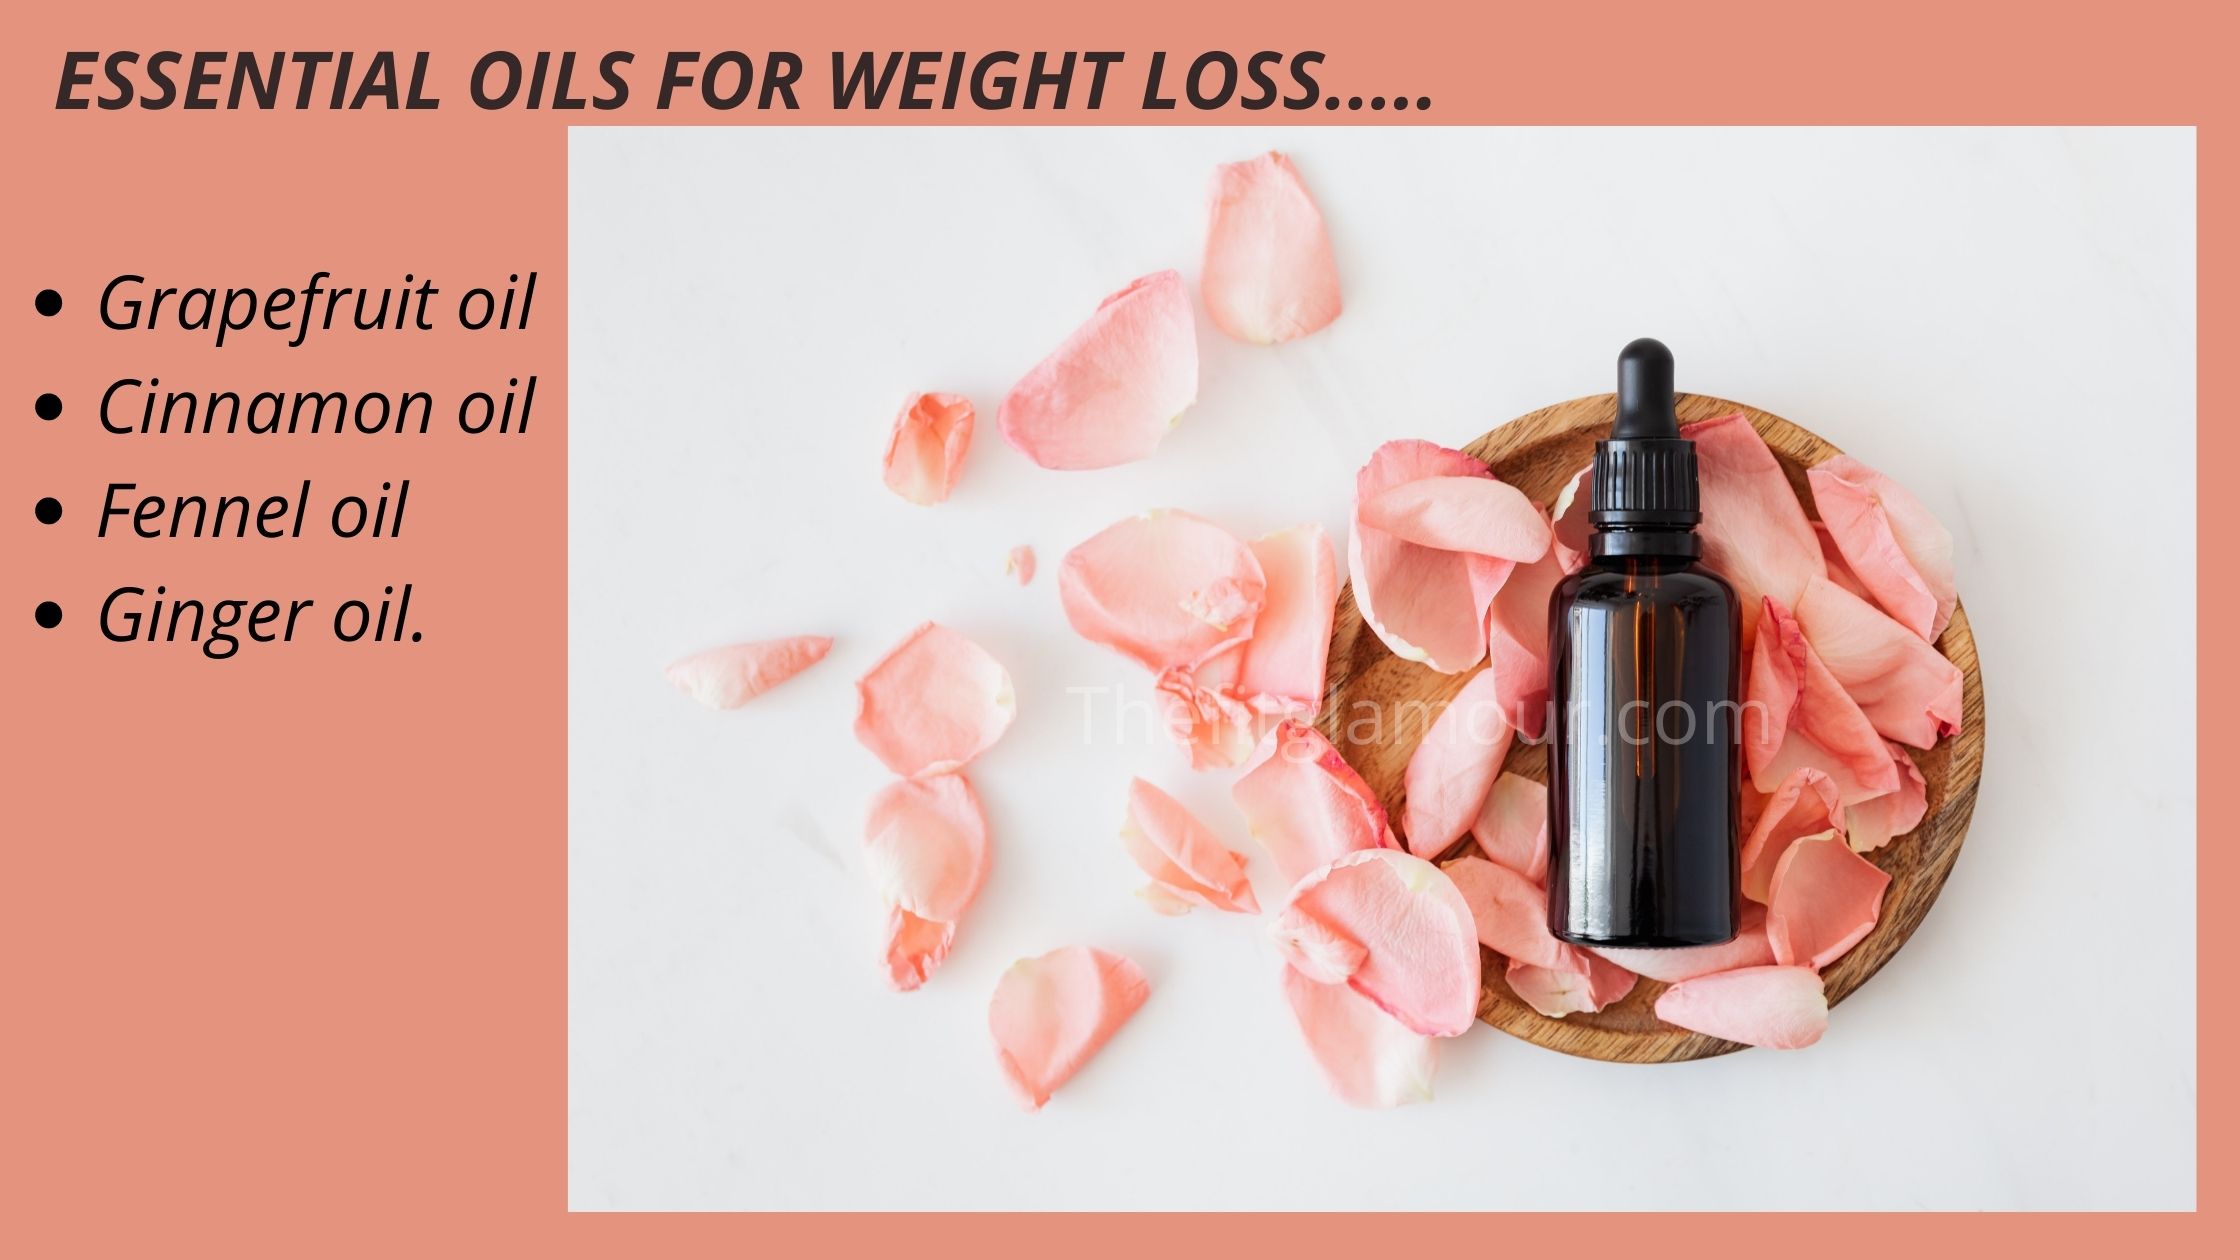 ESSENTIAL OILS FOR WEIGHT LOSS